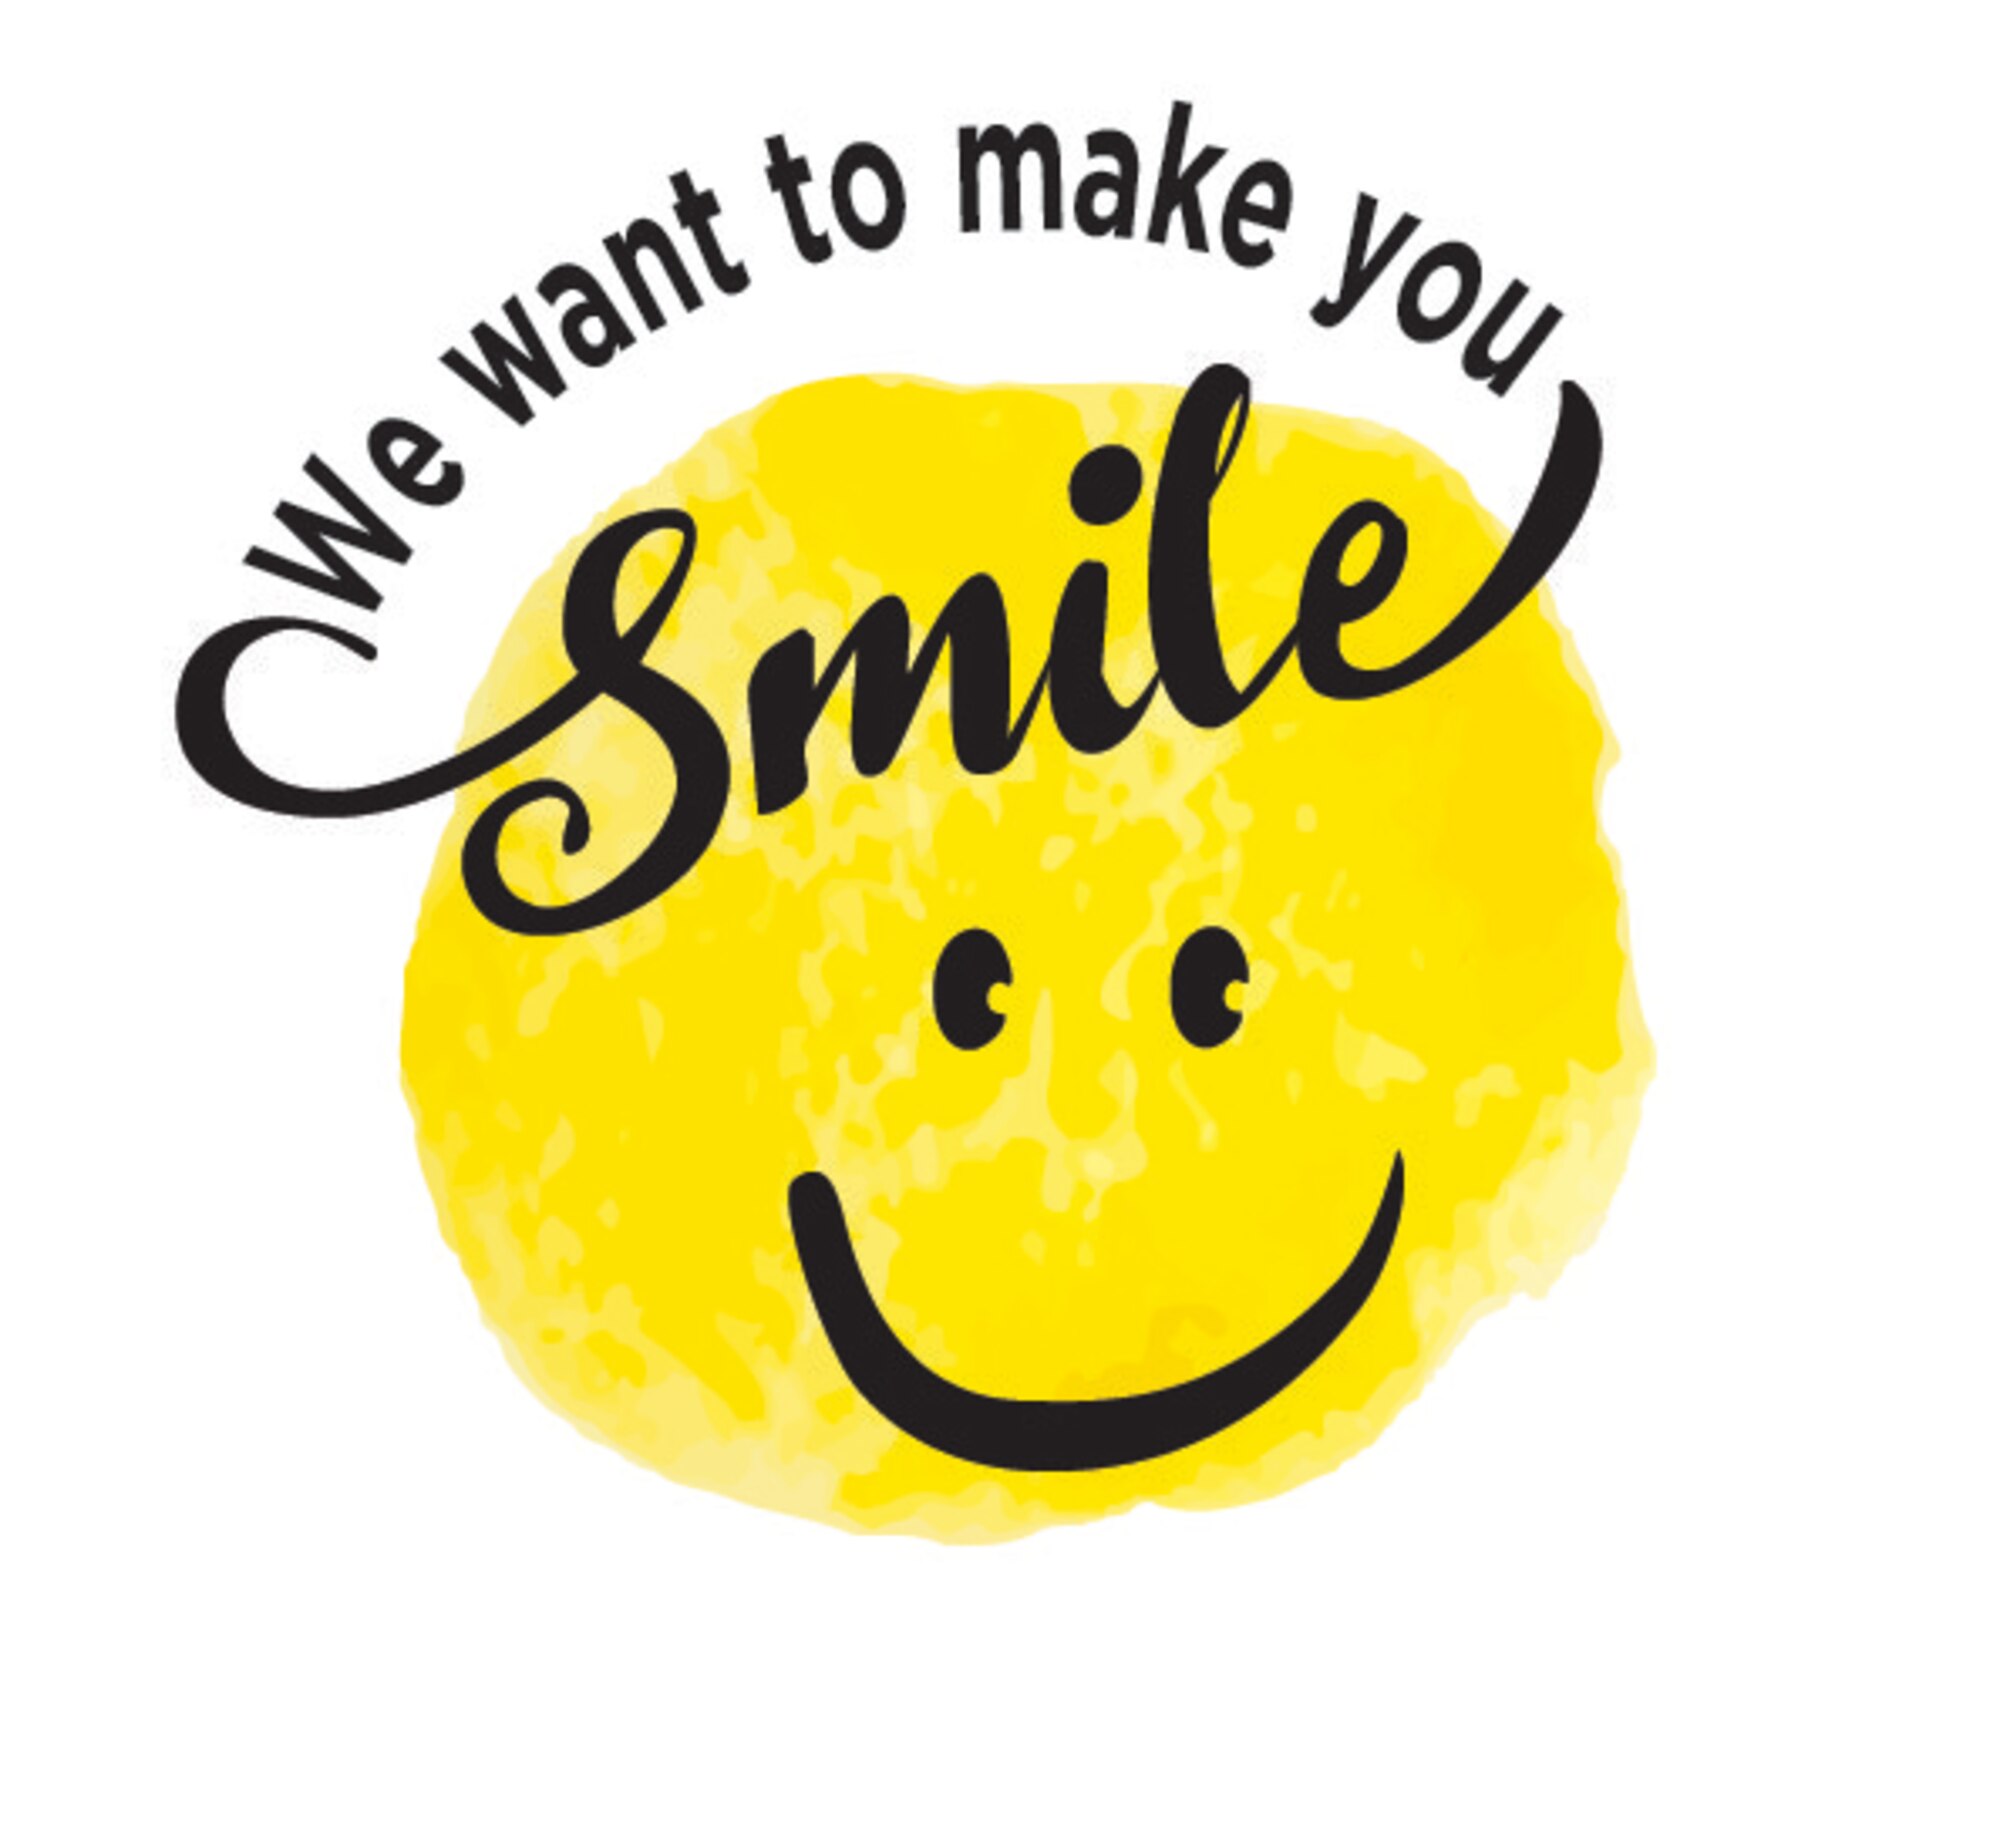 Starting Aug. 1, FSS customers in the JBSA community will have opportunities to win FSS gift cards on a daily basis as part of “Smile,” a monthlong customer reward and appreciation program